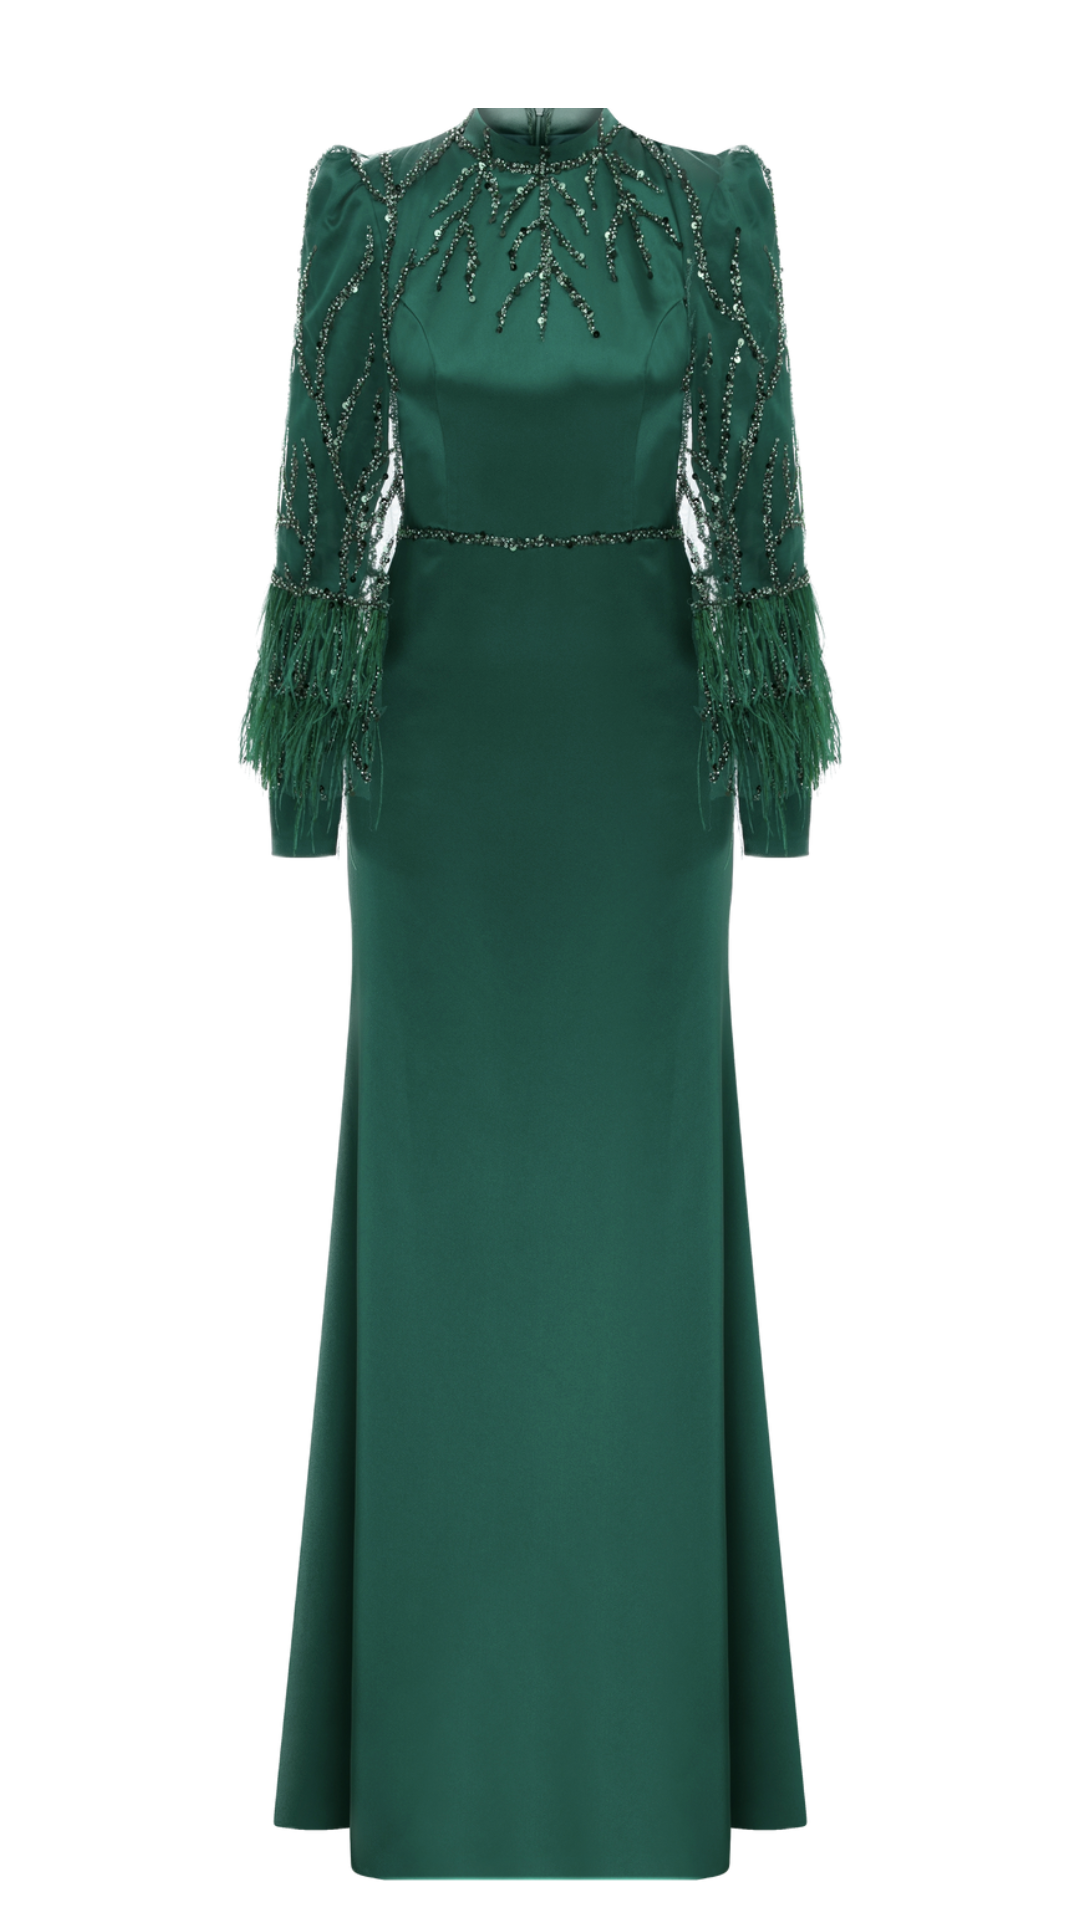 Satin Elegance: Modest Full Mold Dress with Feathered Cape Detail